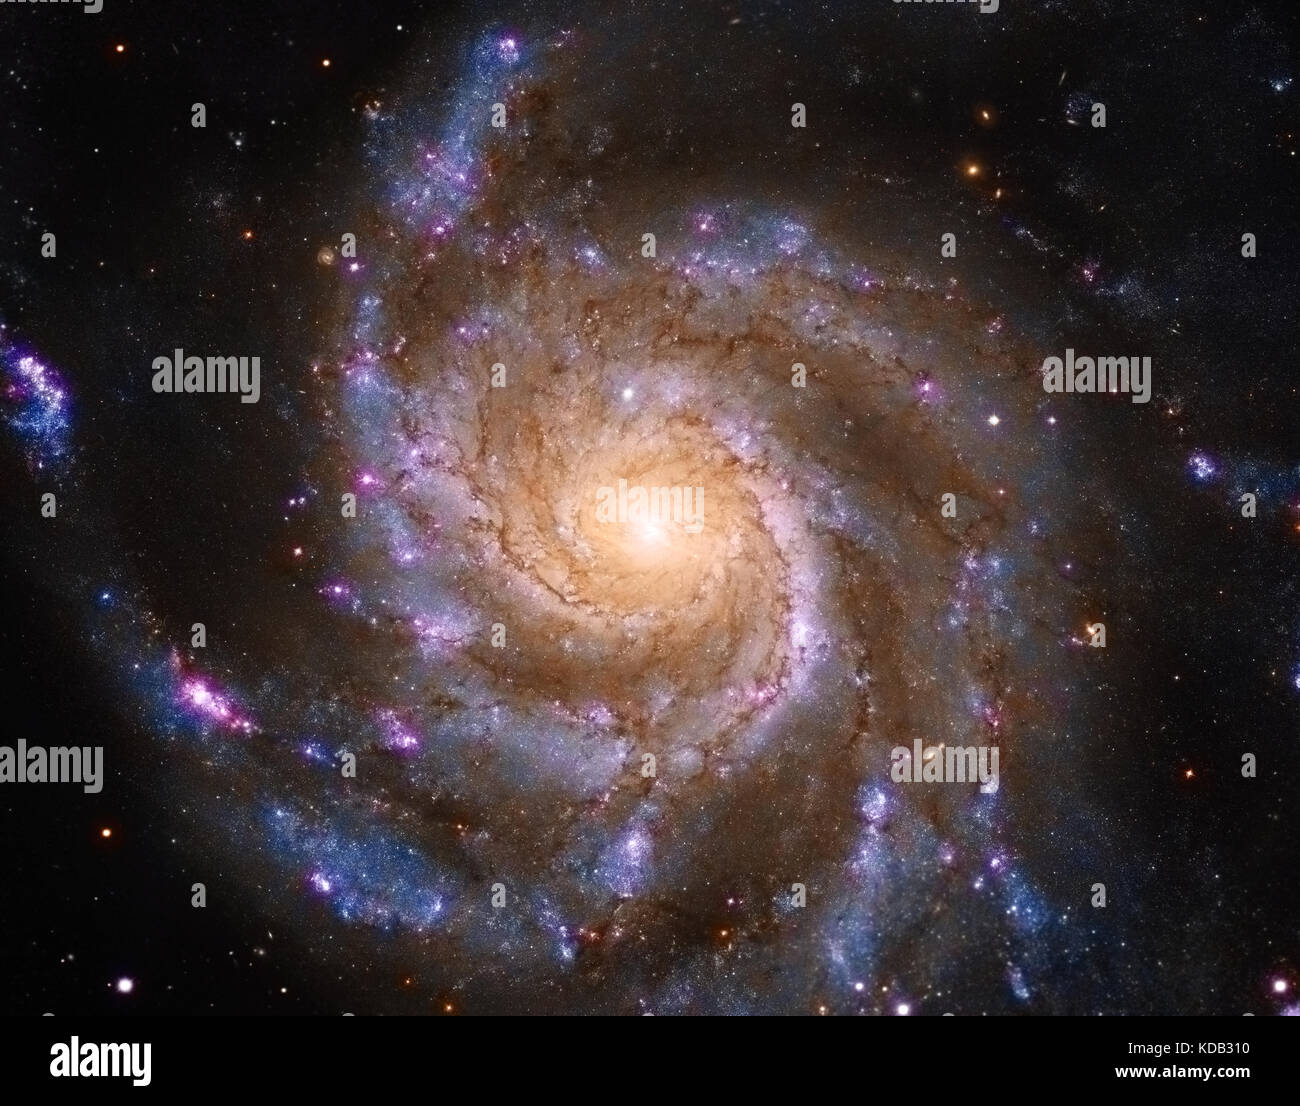 Pinwheel Galaxy (also known as Messier 101, M101 or NGC 5457)  in the constellation Ursa Major. Elements of this image furnished by NASA. Stock Photo